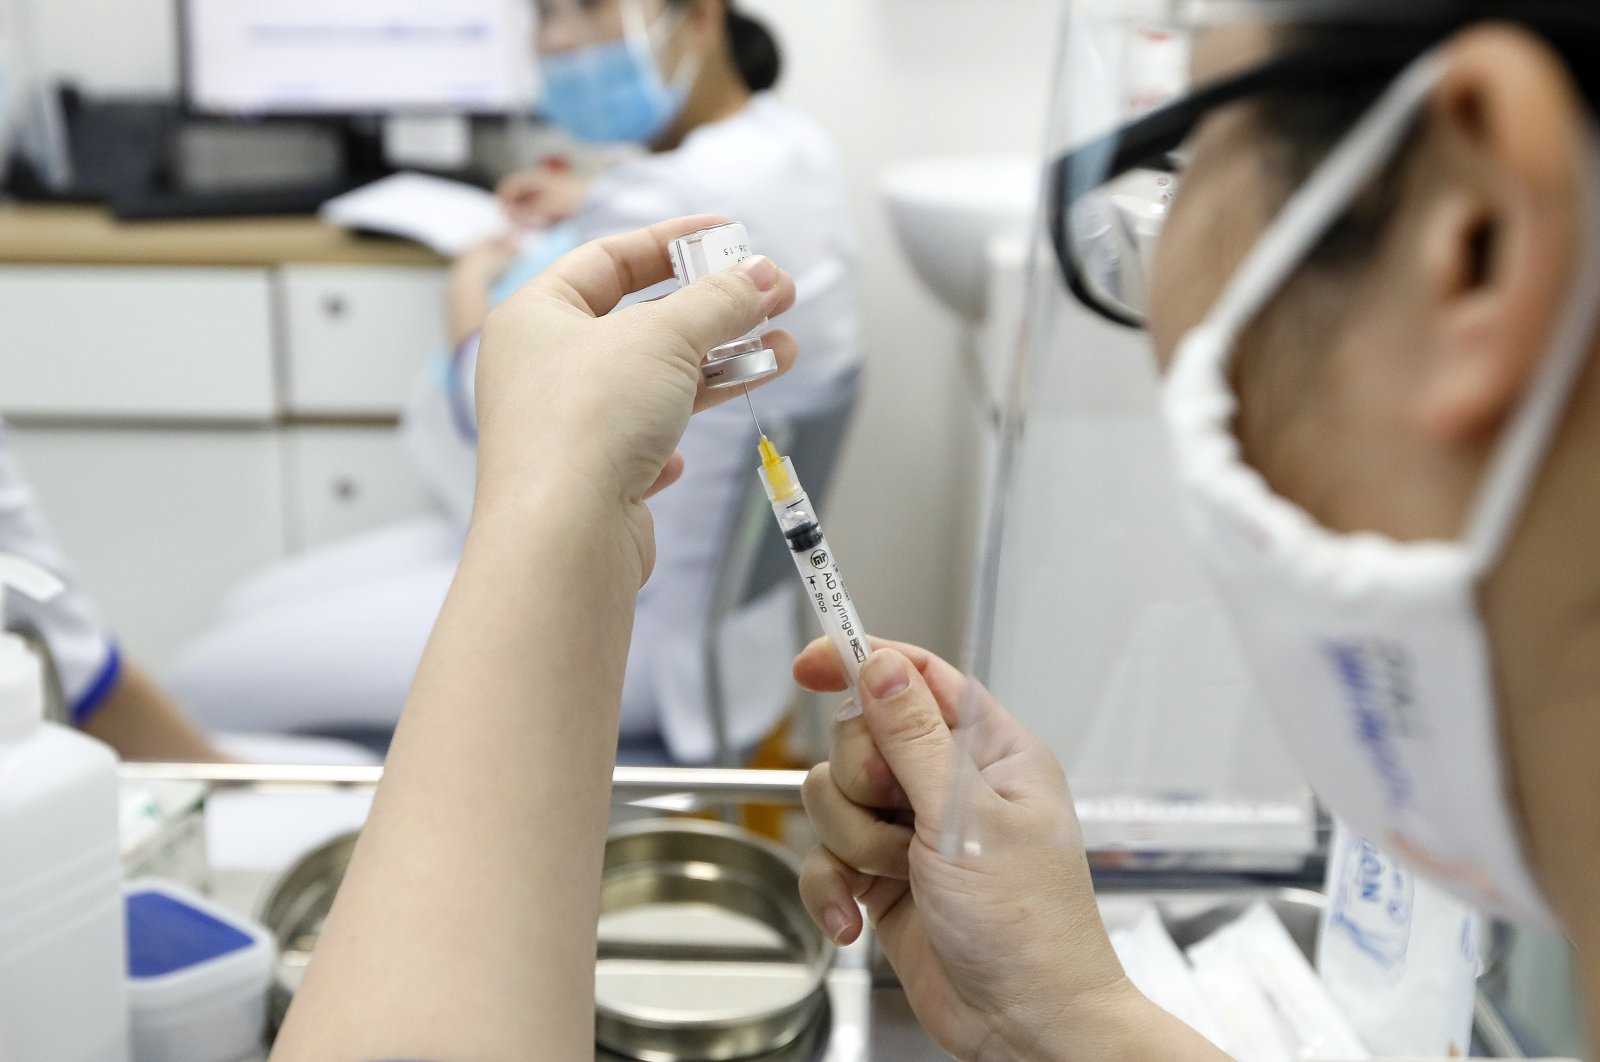 A health worker prepares a shot of COVID-19 vaccine developed by AstraZeneca at a vaccination center of the Vietnam Vaccine Joint Stock Company (VNVC), in Hanoi, Vietnam, March 17, 2021. (EPA Photo)